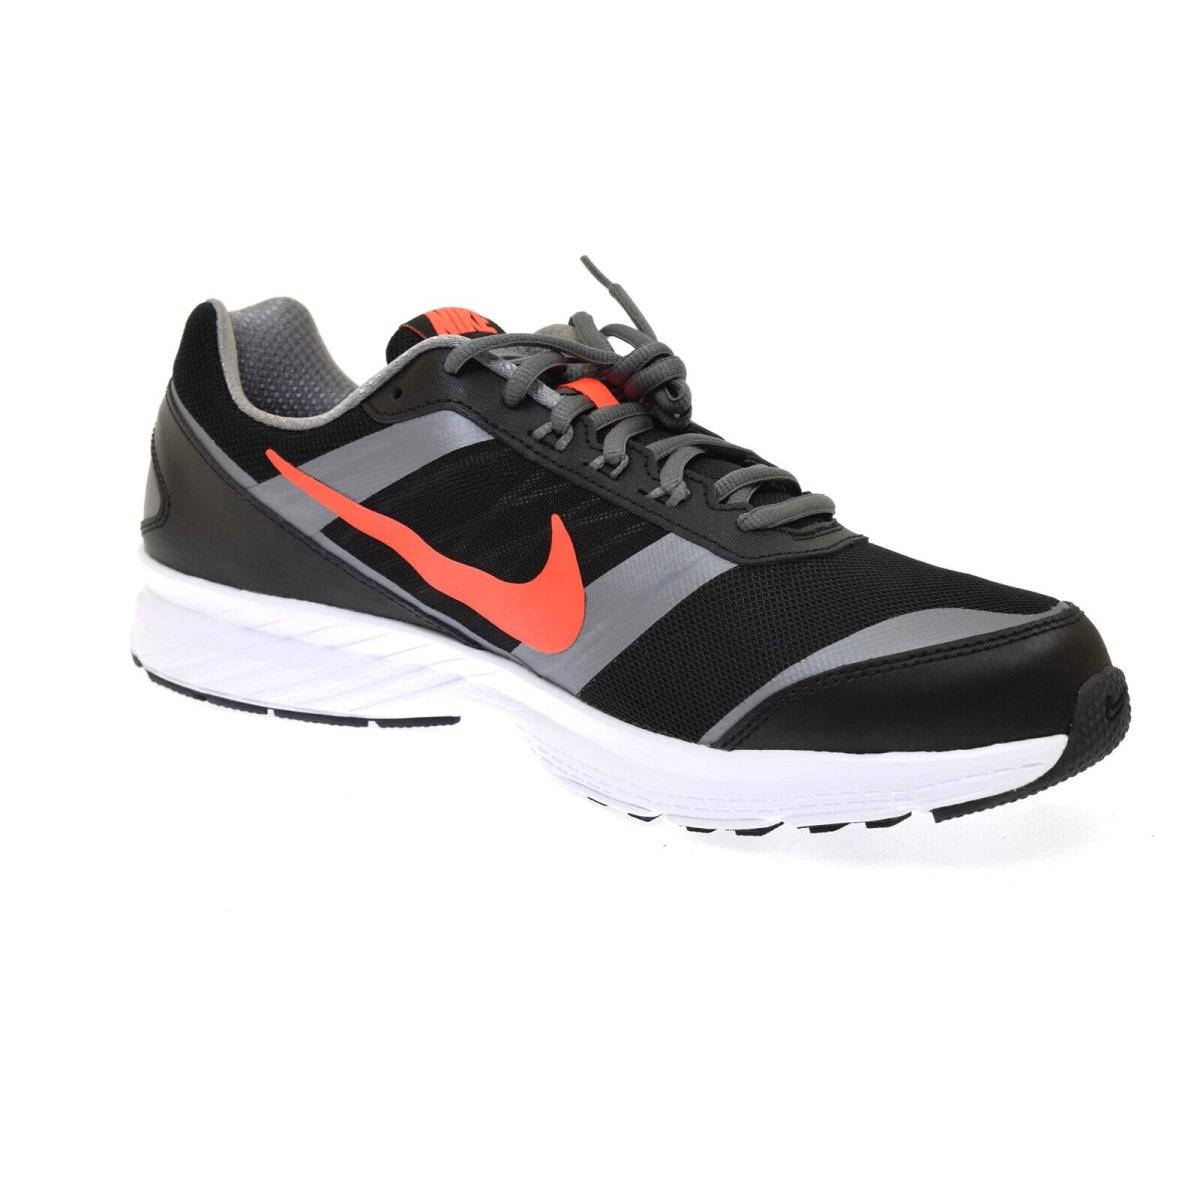 Nike shoes  - BLK/GRY/ORNG 0